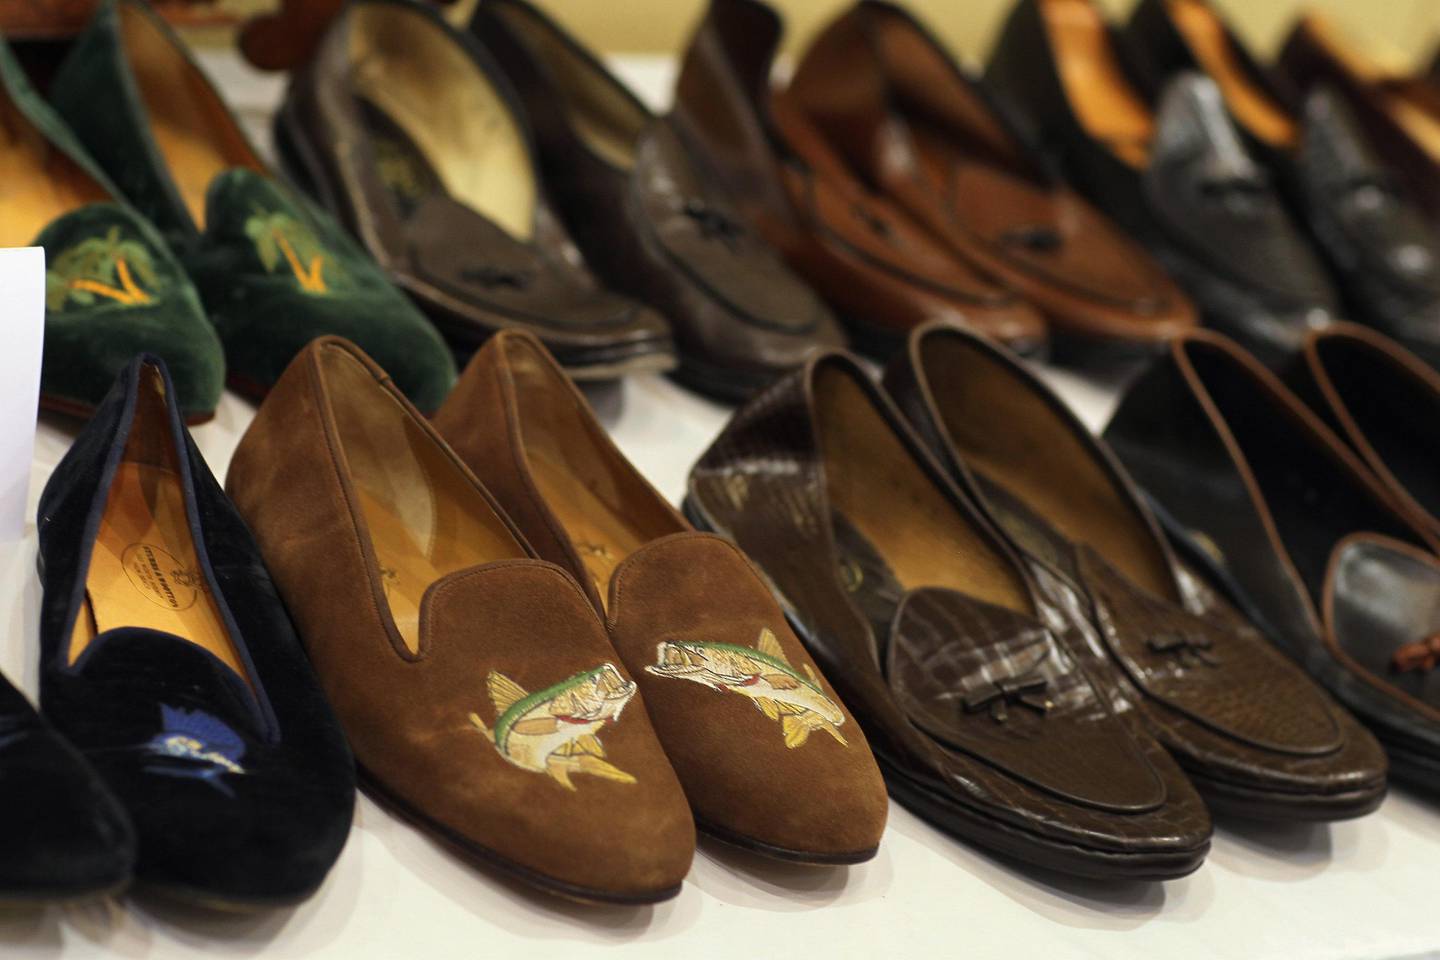 MIAMI BEACH, FL - JUNE 02: Shoes from Bernard L. Madoff's estate are seen on display before they are auctioned off on Saturday at the Miami Beach Convention Center on June 2, 2011 in Miami Beach, Florida. The auction held by the U.S. Marshals Service are items seized from Madoff's Palm Beach home after he was charged with his $65 billion Ponzi scheme. Madoff is serving a 150 year federal prison sentence.   Joe Raedle/Getty Images/AFP